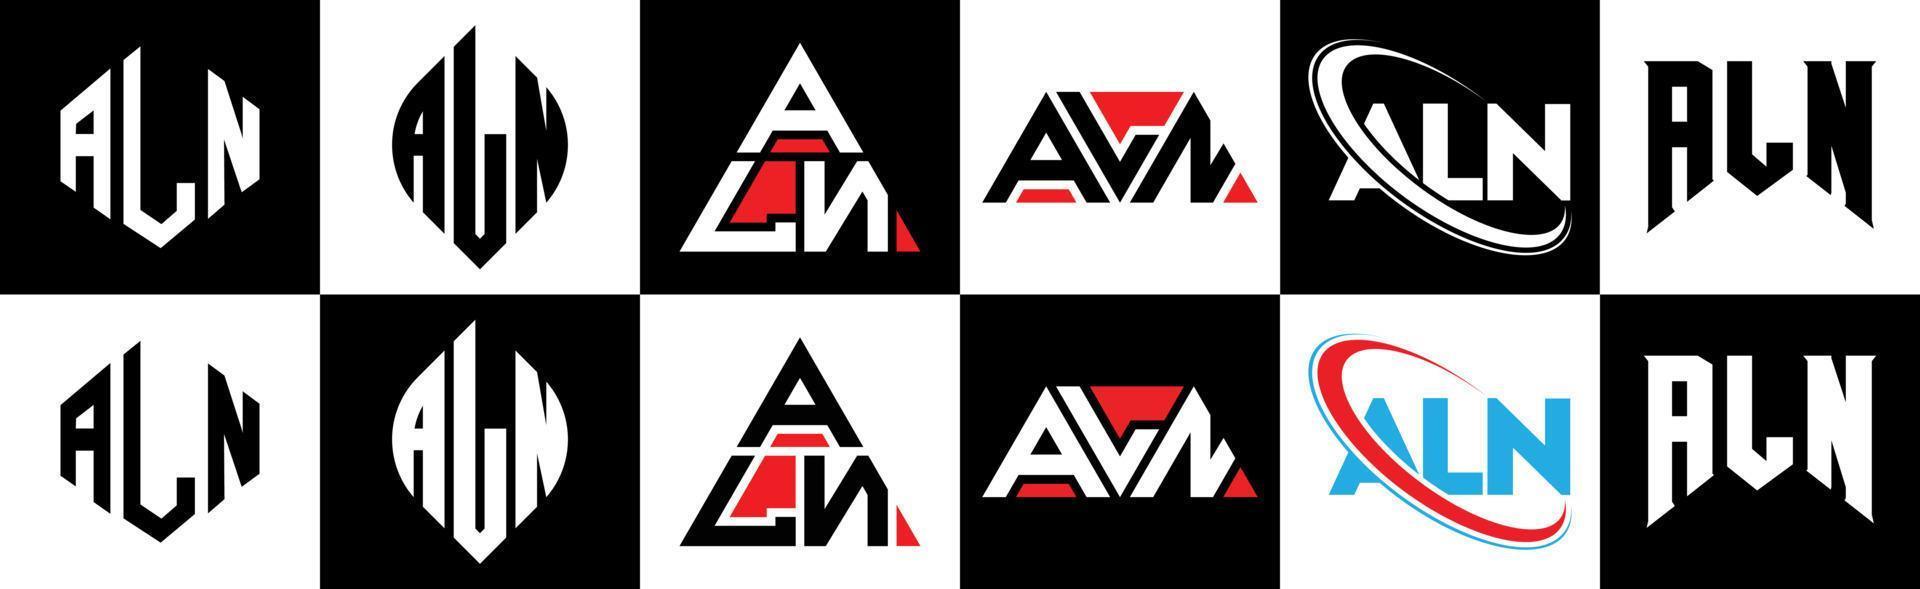 ALN letter logo design in six style. ALN polygon, circle, triangle, hexagon, flat and simple style with black and white color variation letter logo set in one artboard. ALN minimalist and classic logo vector